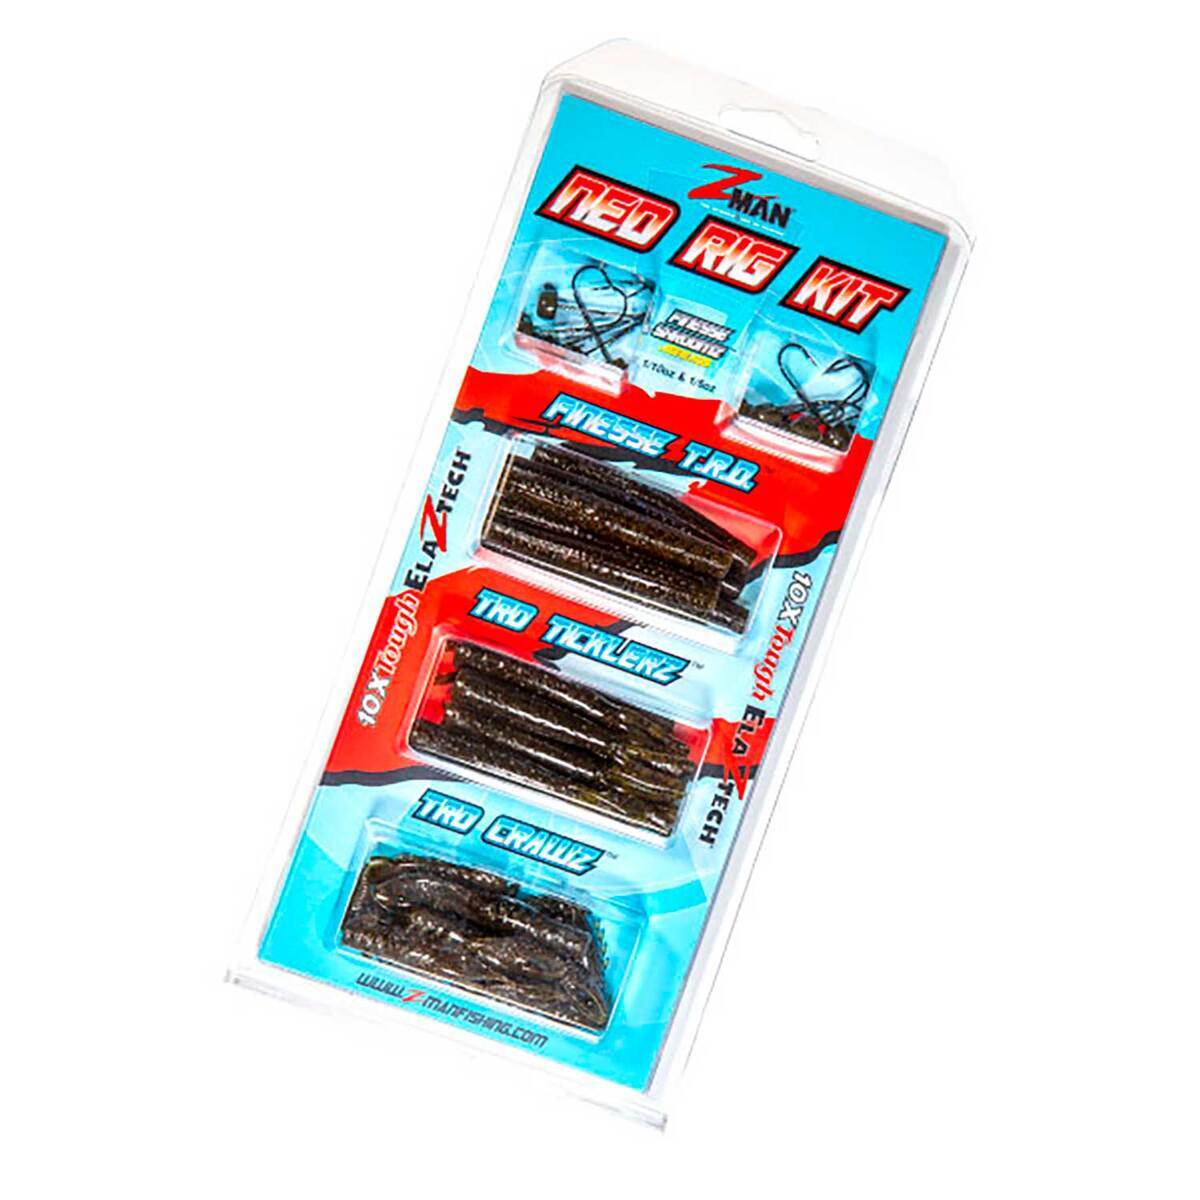 Z-MAN Mag ShroomZ Jig Worm Jigheads Series 3-Pack CHOOSE YOUR COLOR & WEIGHT !